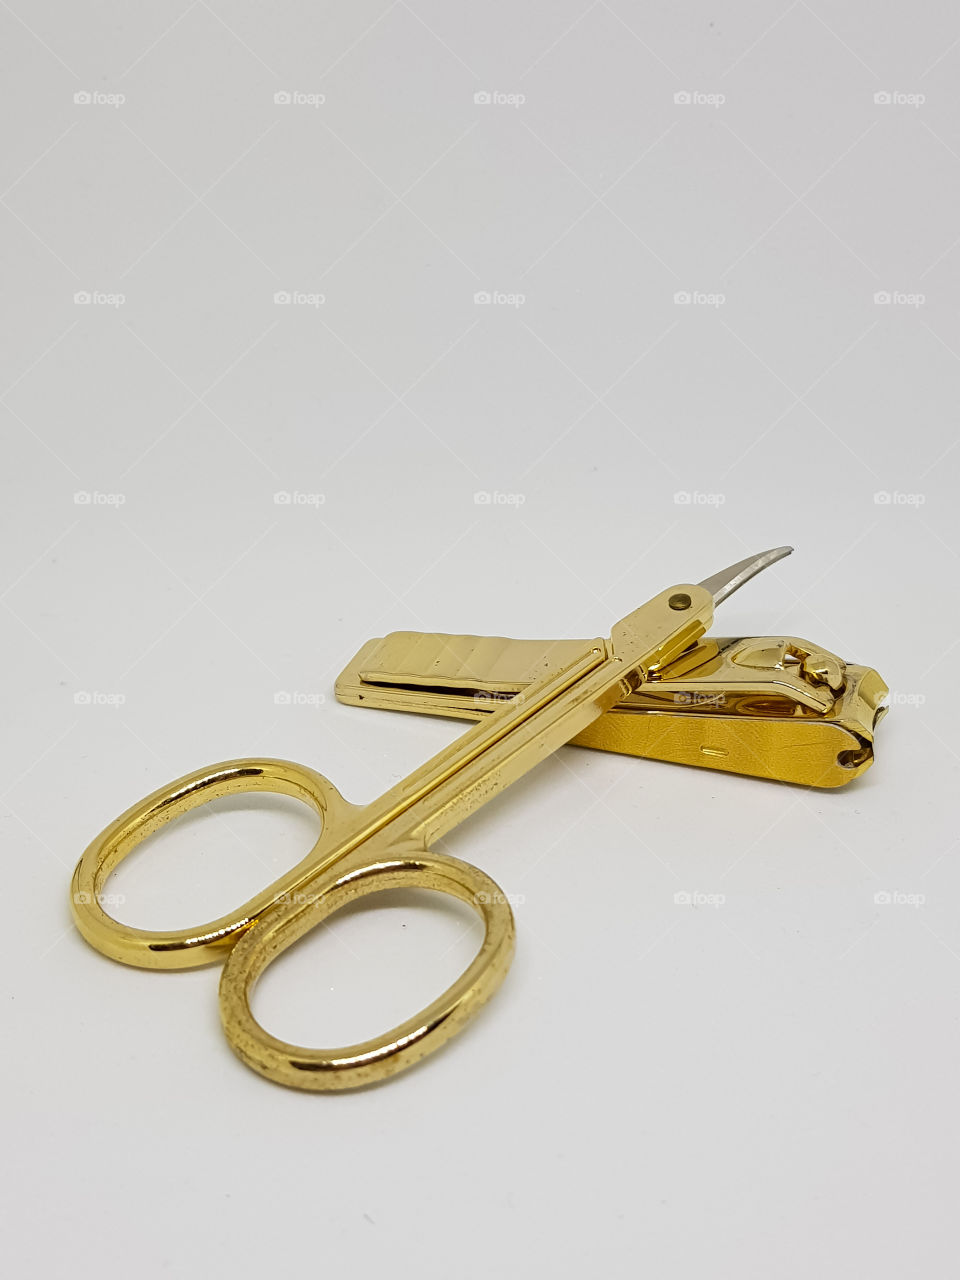 gold scissors and gold nail clipper is necessary tool for people.